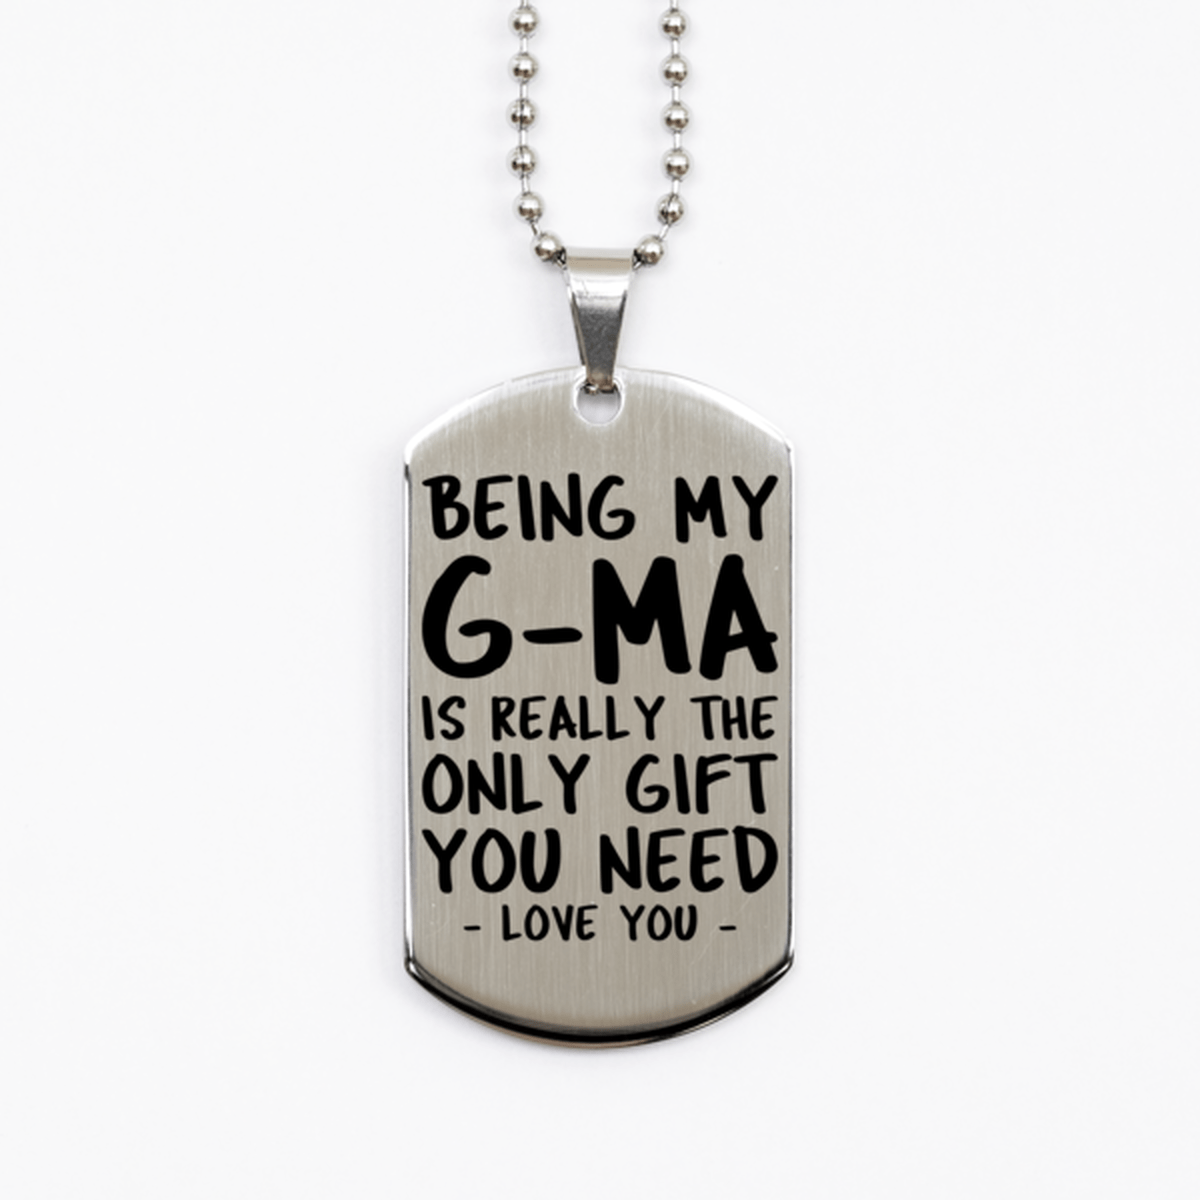 Funny G-ma Silver Dog Tag Necklace, Being My G-ma Is Really the Only Gift You Need, Best Birthday Gifts for G-ma